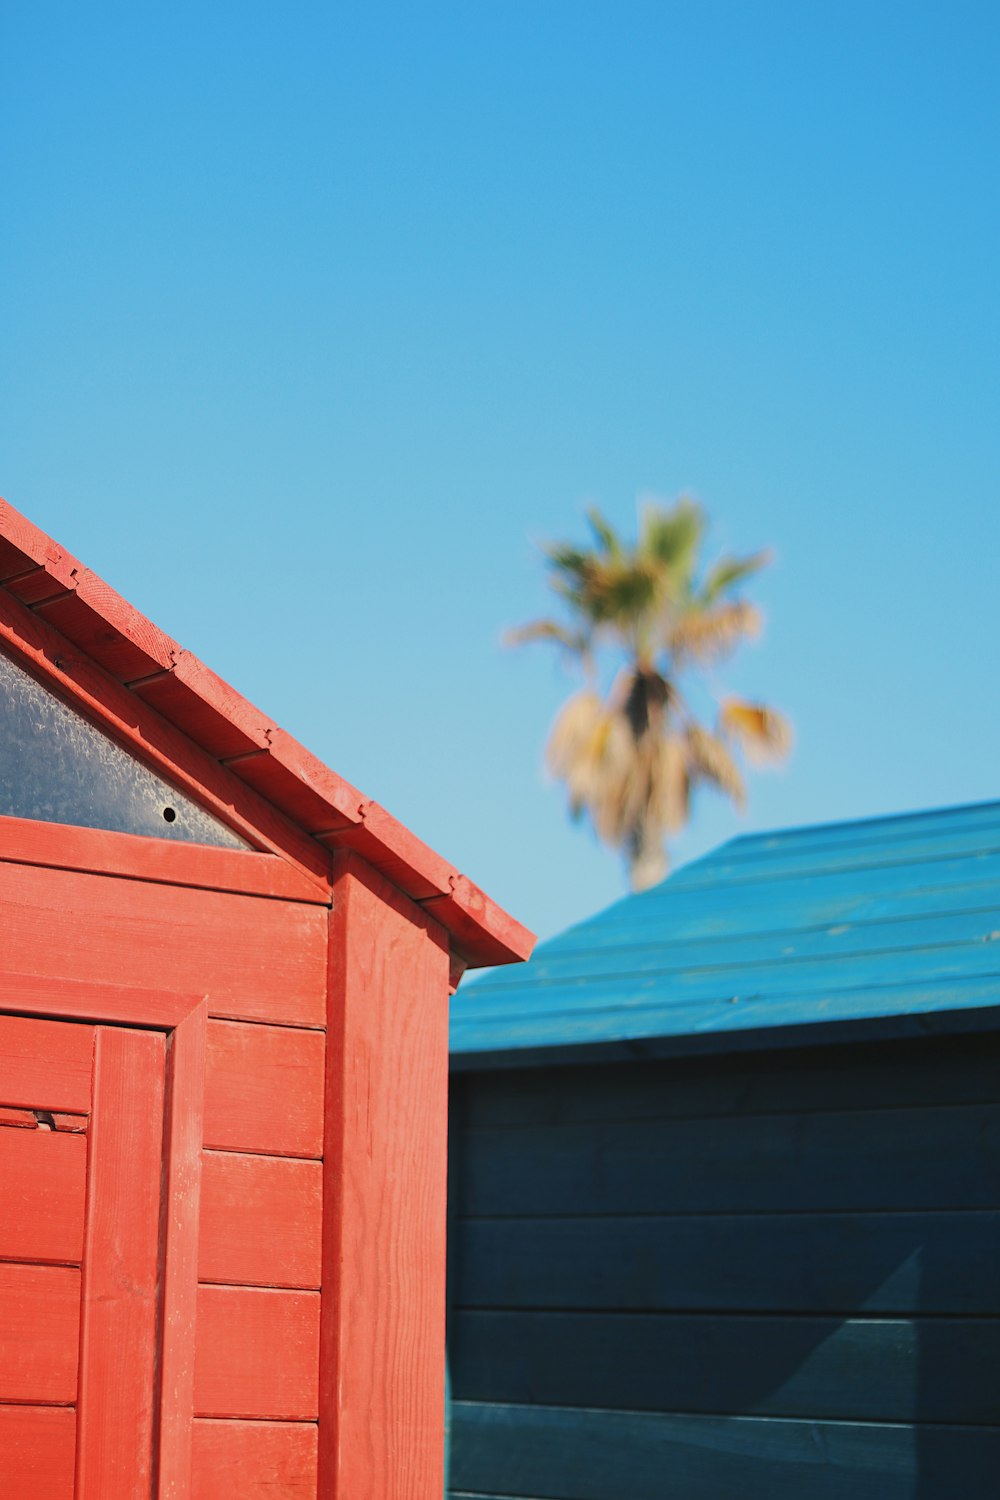 red and blue wooden sheds under blue sky